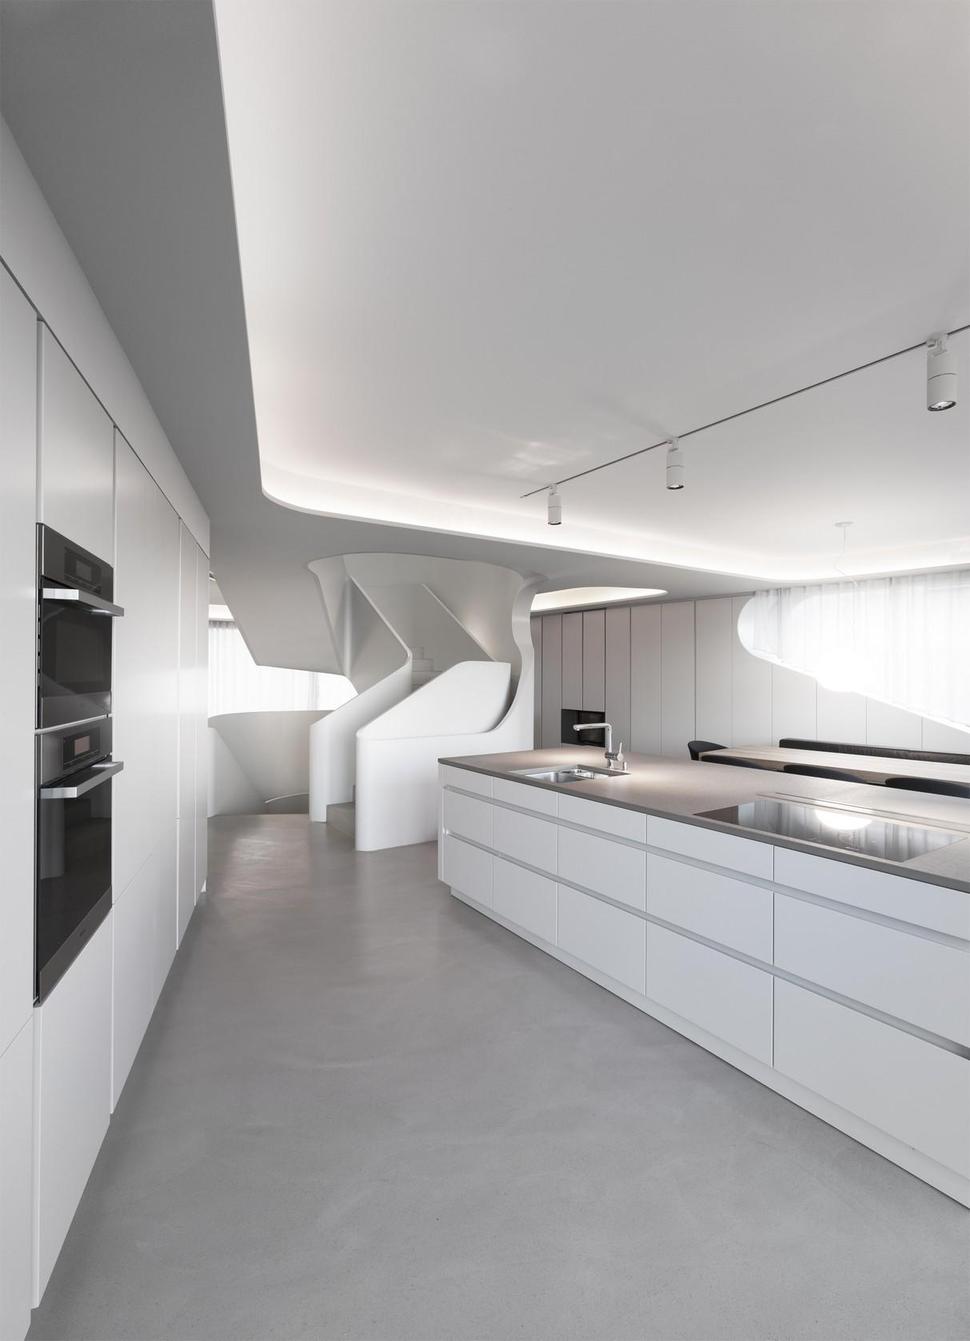 angular-modern-home-features-large-curvaceous-stairwell-inside-10-kitchen.jpg